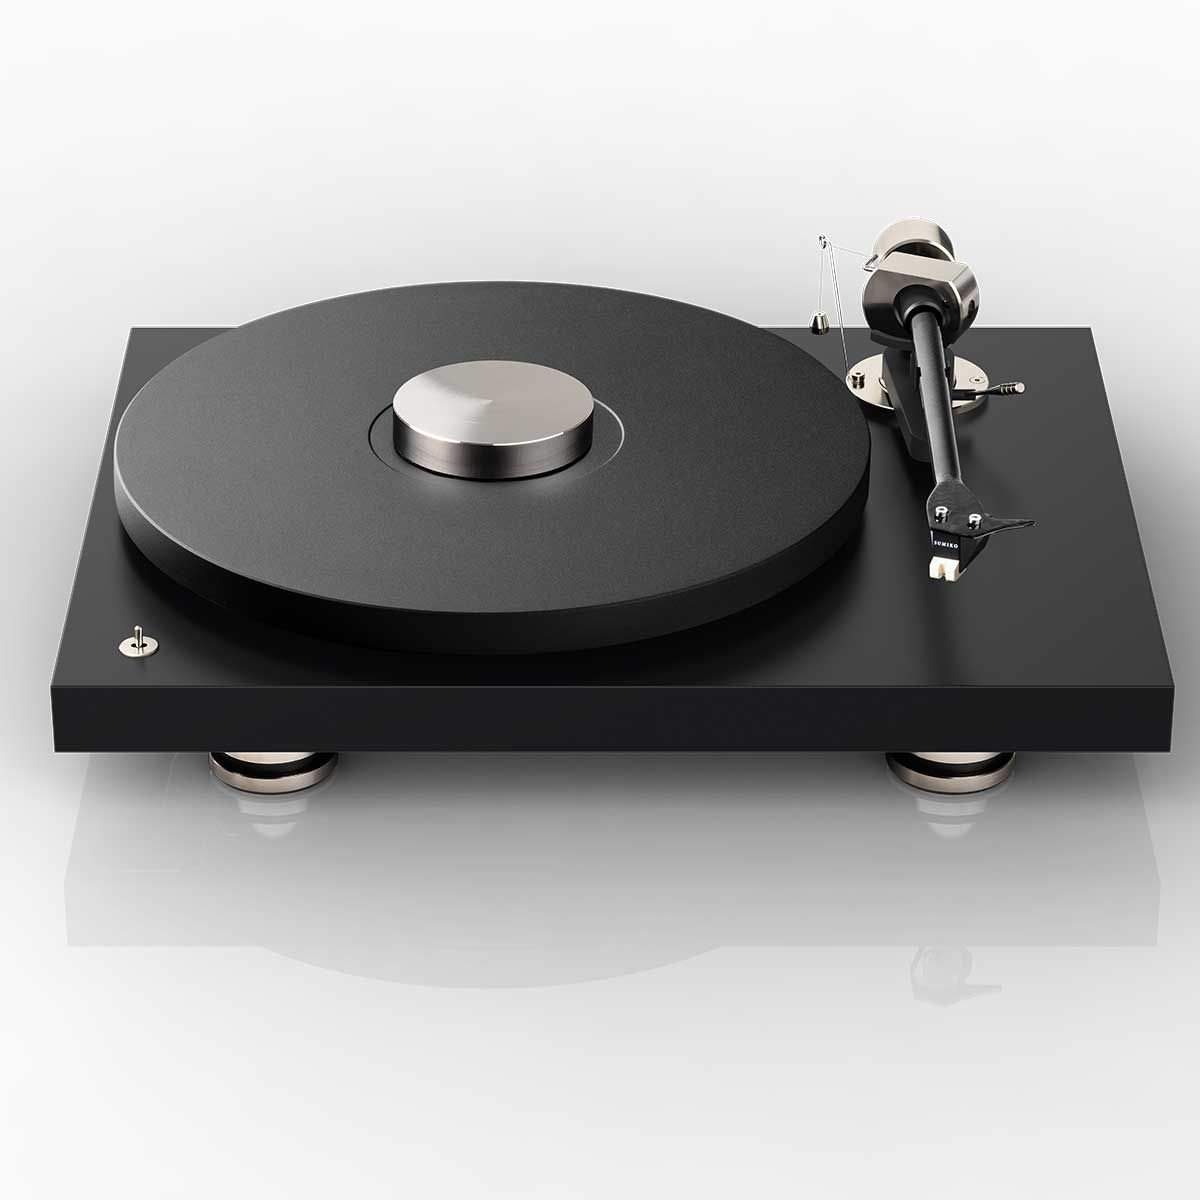 Pro-Ject Debut PRO Turntable, Satin Black, front top view with record puck